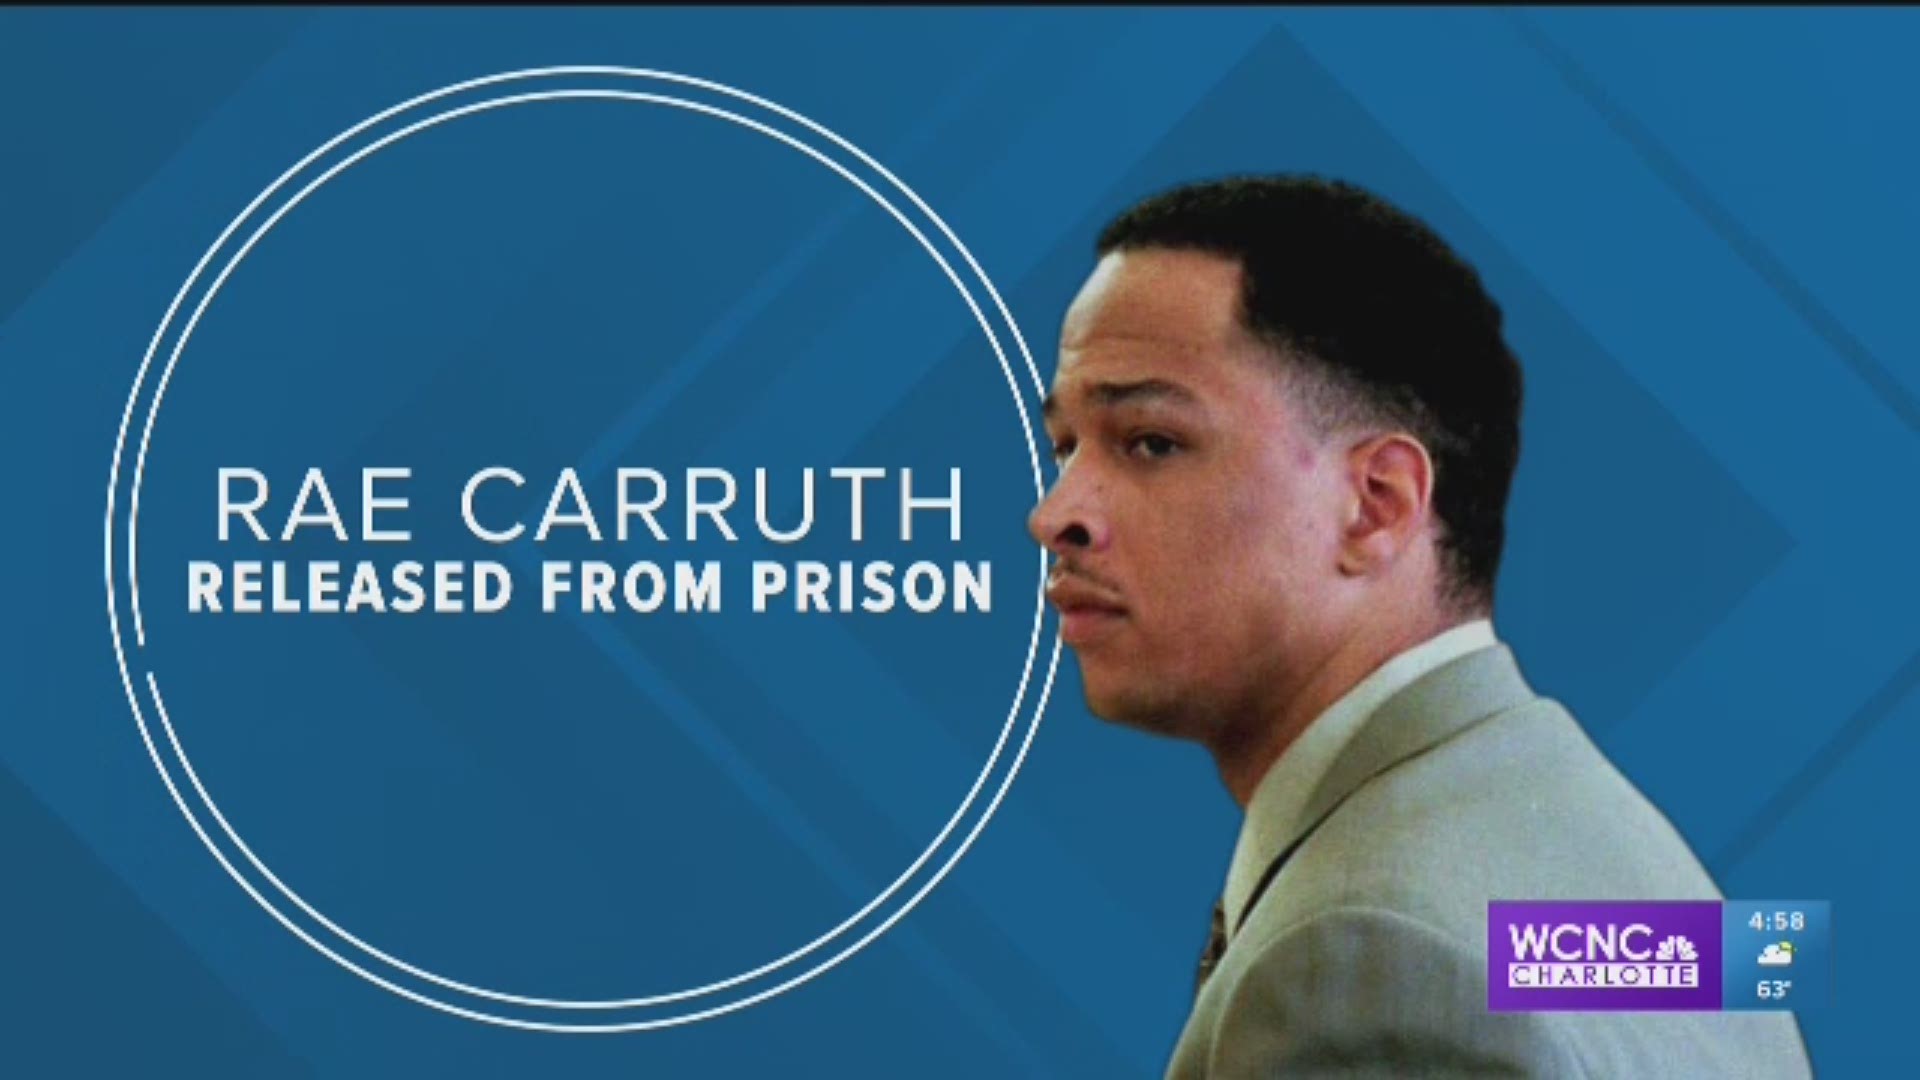 Rae Carruth sped away in a white Tahoe just after 8 a.m. Monday morning. His first day as a free man in 18 years.